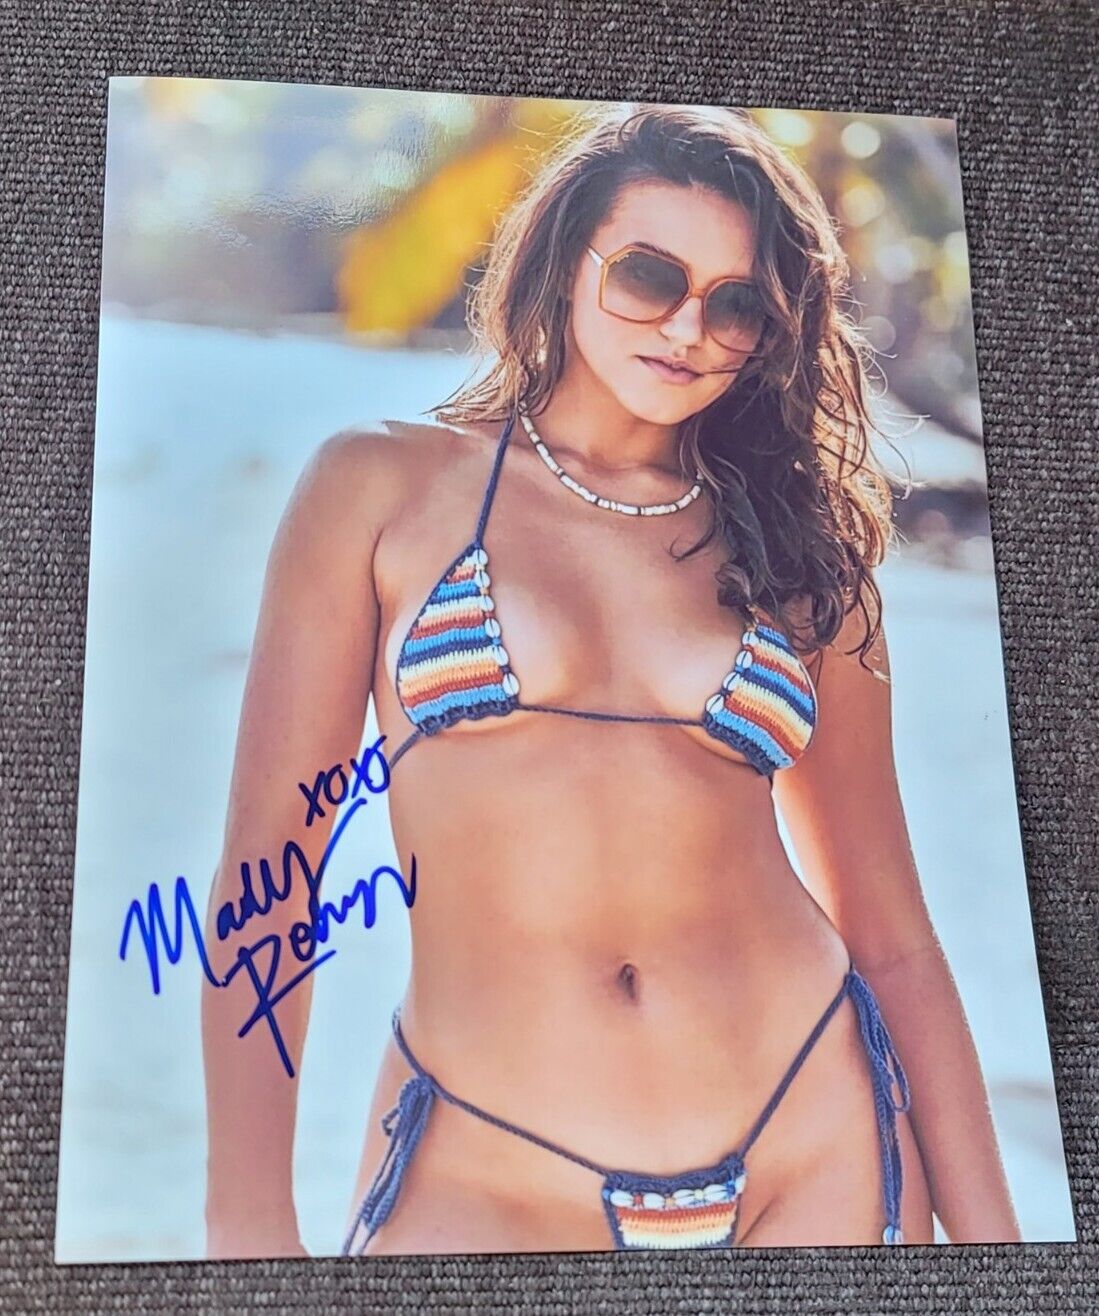 Mady Dewey Signed 8x10 Photo Sports Illustrated Swimsuit Model w/Proof Authentic